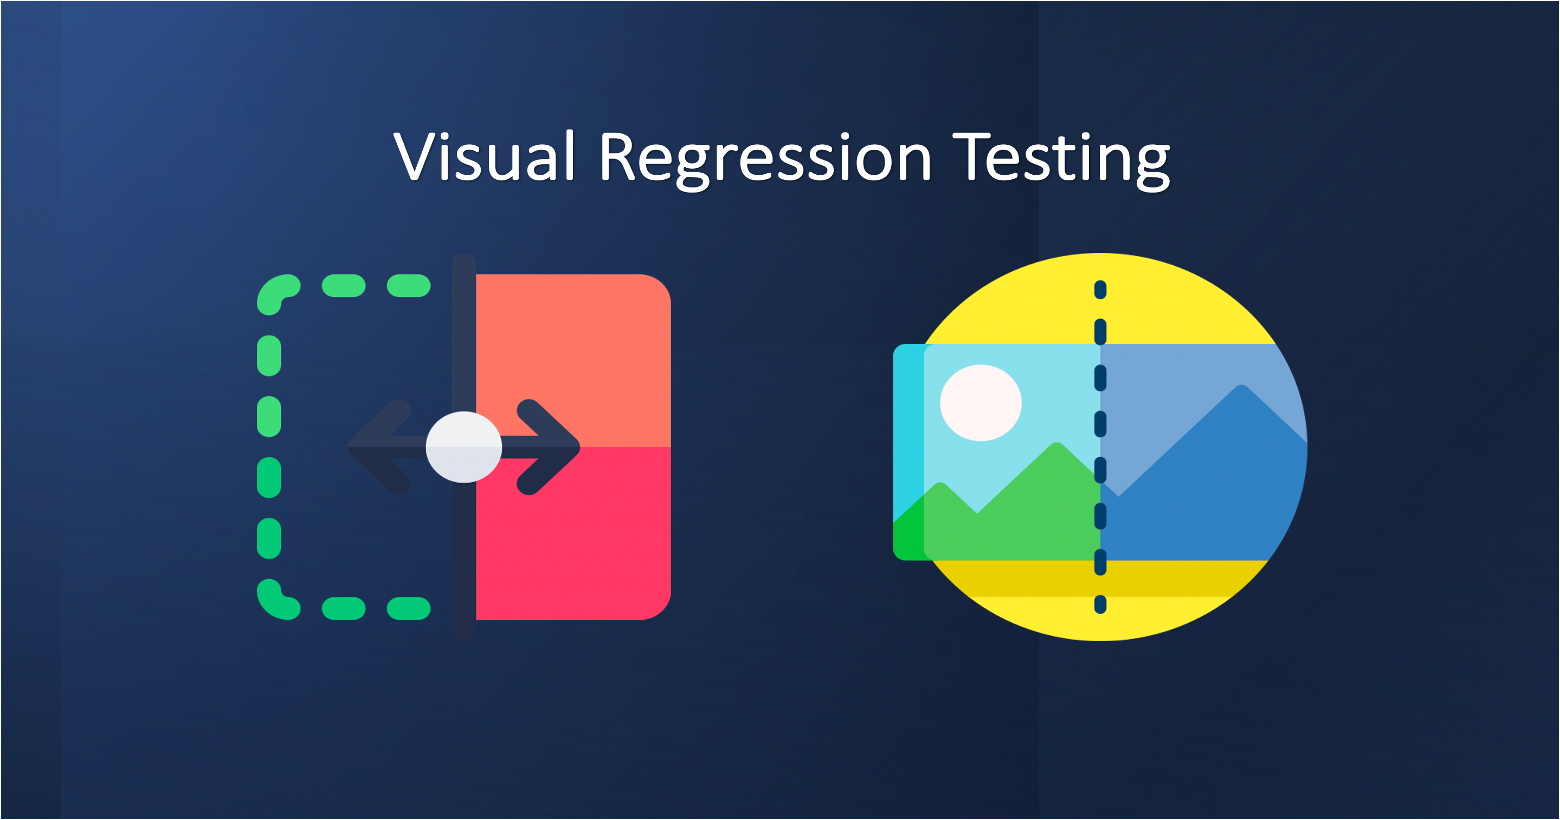 Text saying "visual regression testing" along with two before and after icons on a dark blue background